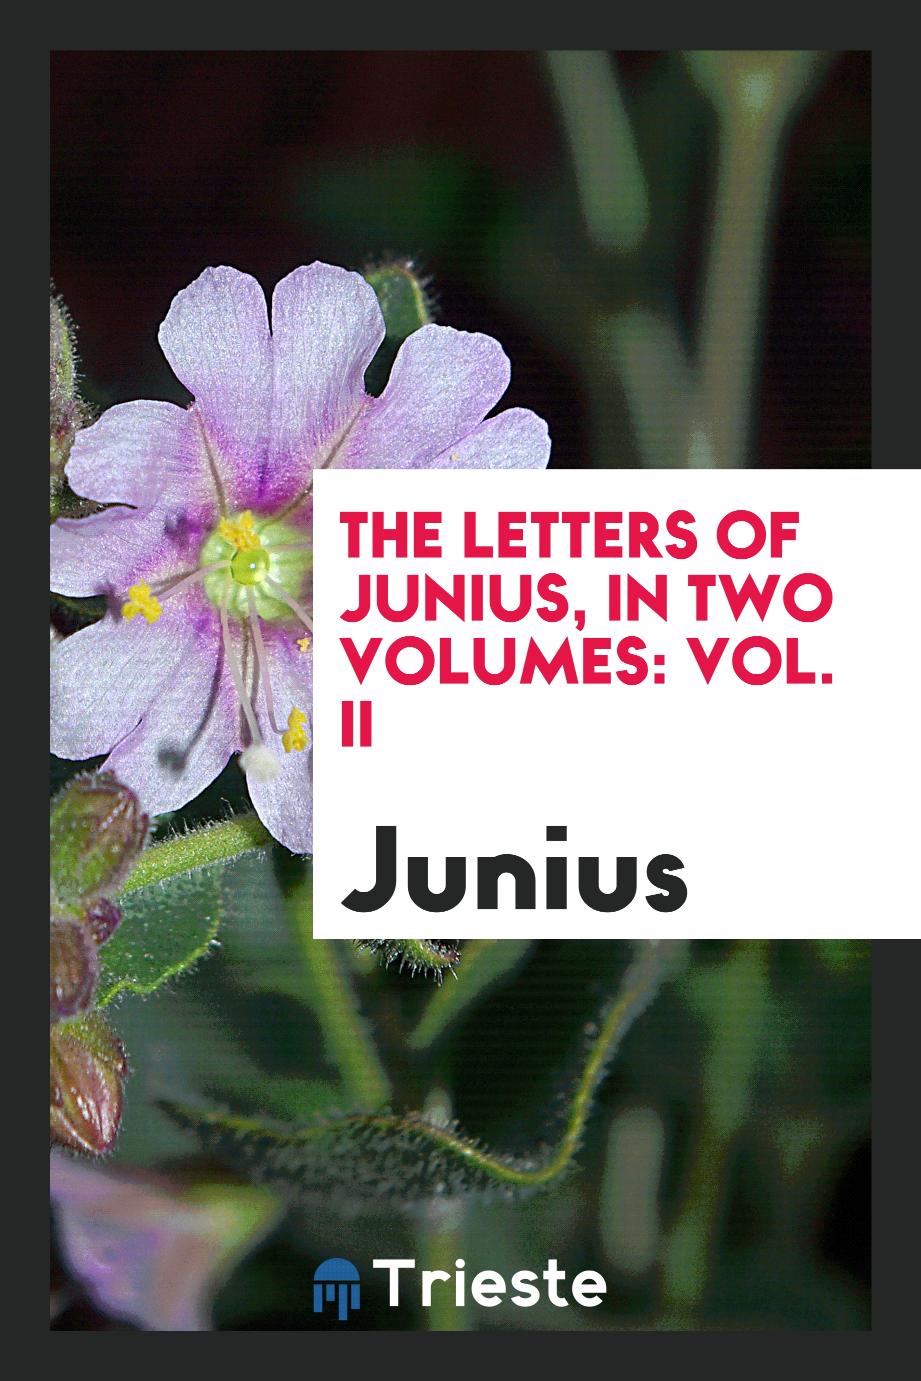 The Letters of Junius, in Two Volumes: Vol. II